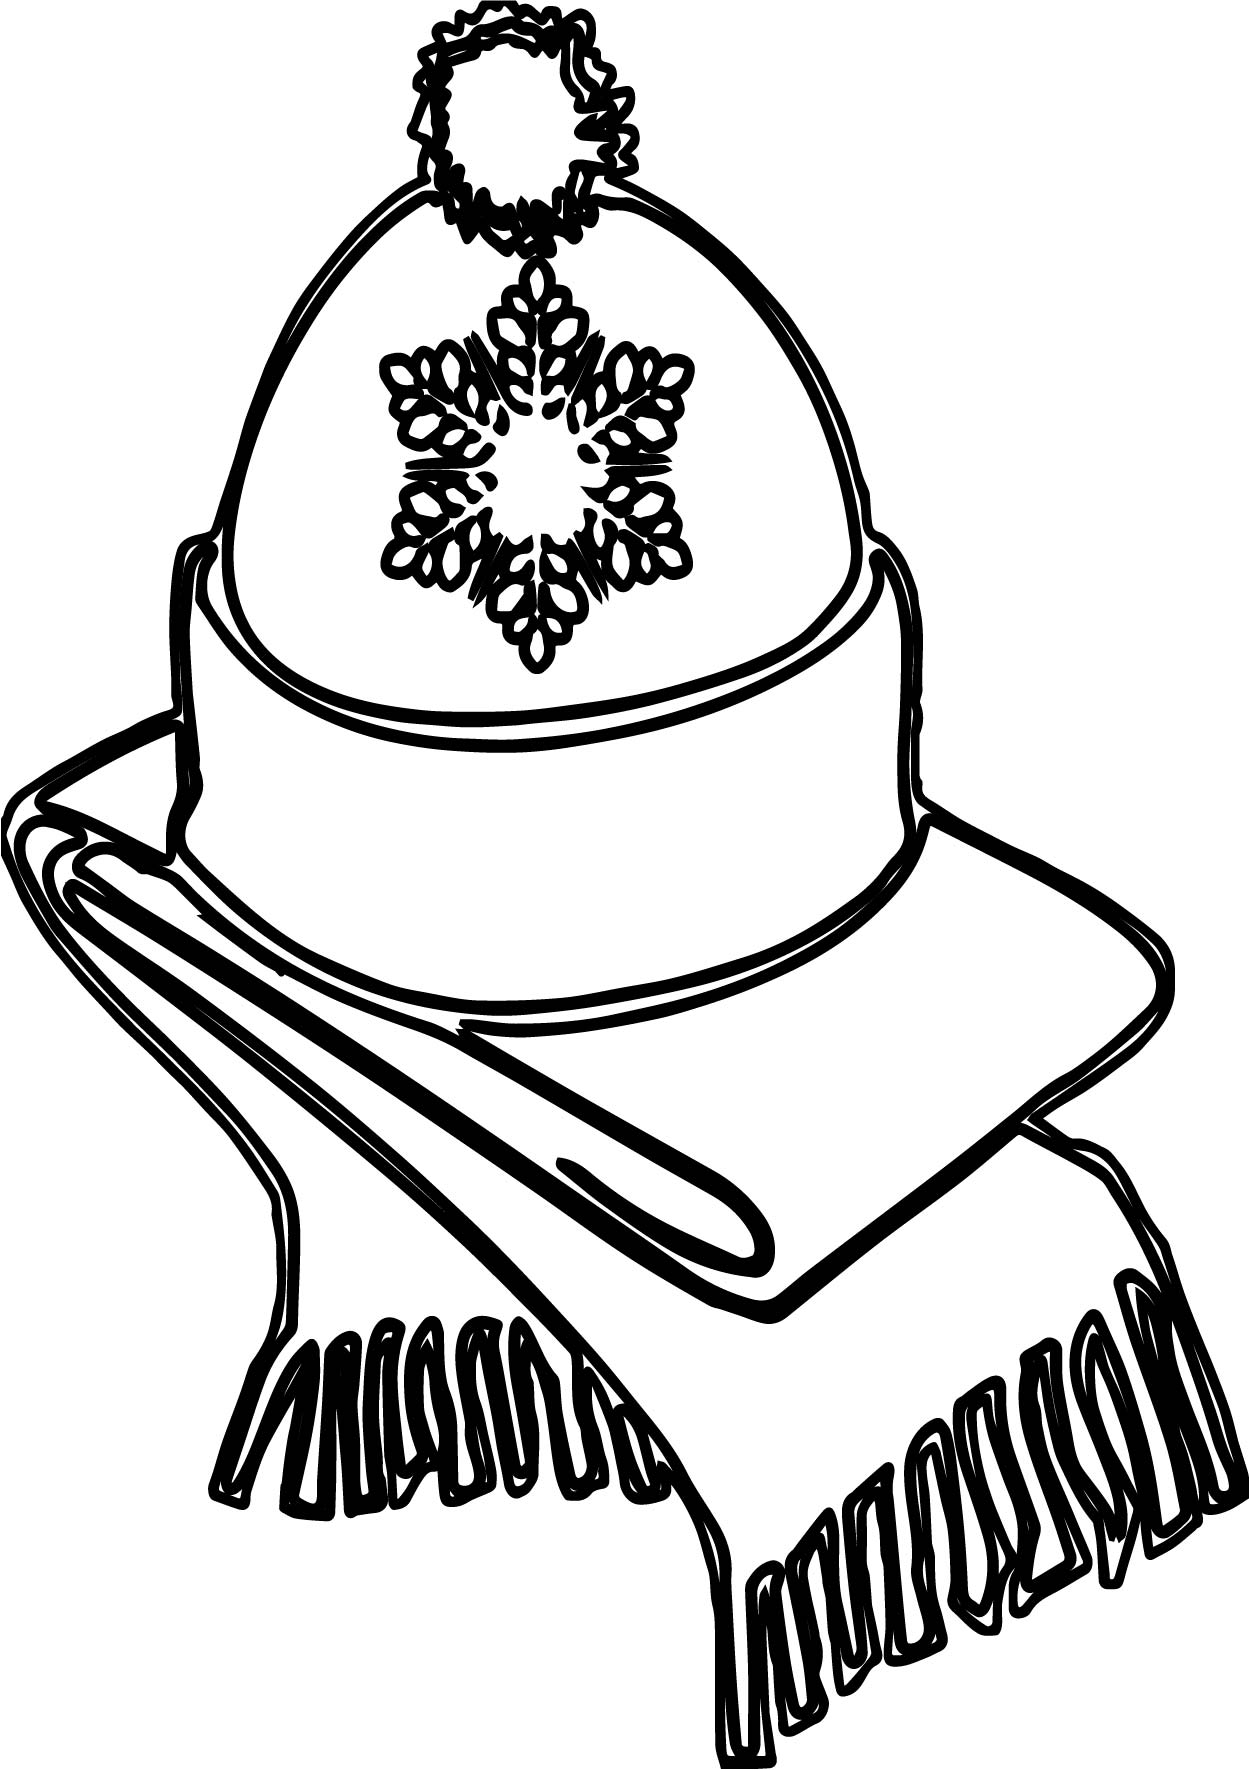 Winter Hat Coloring Pages at GetColorings.com | Free printable